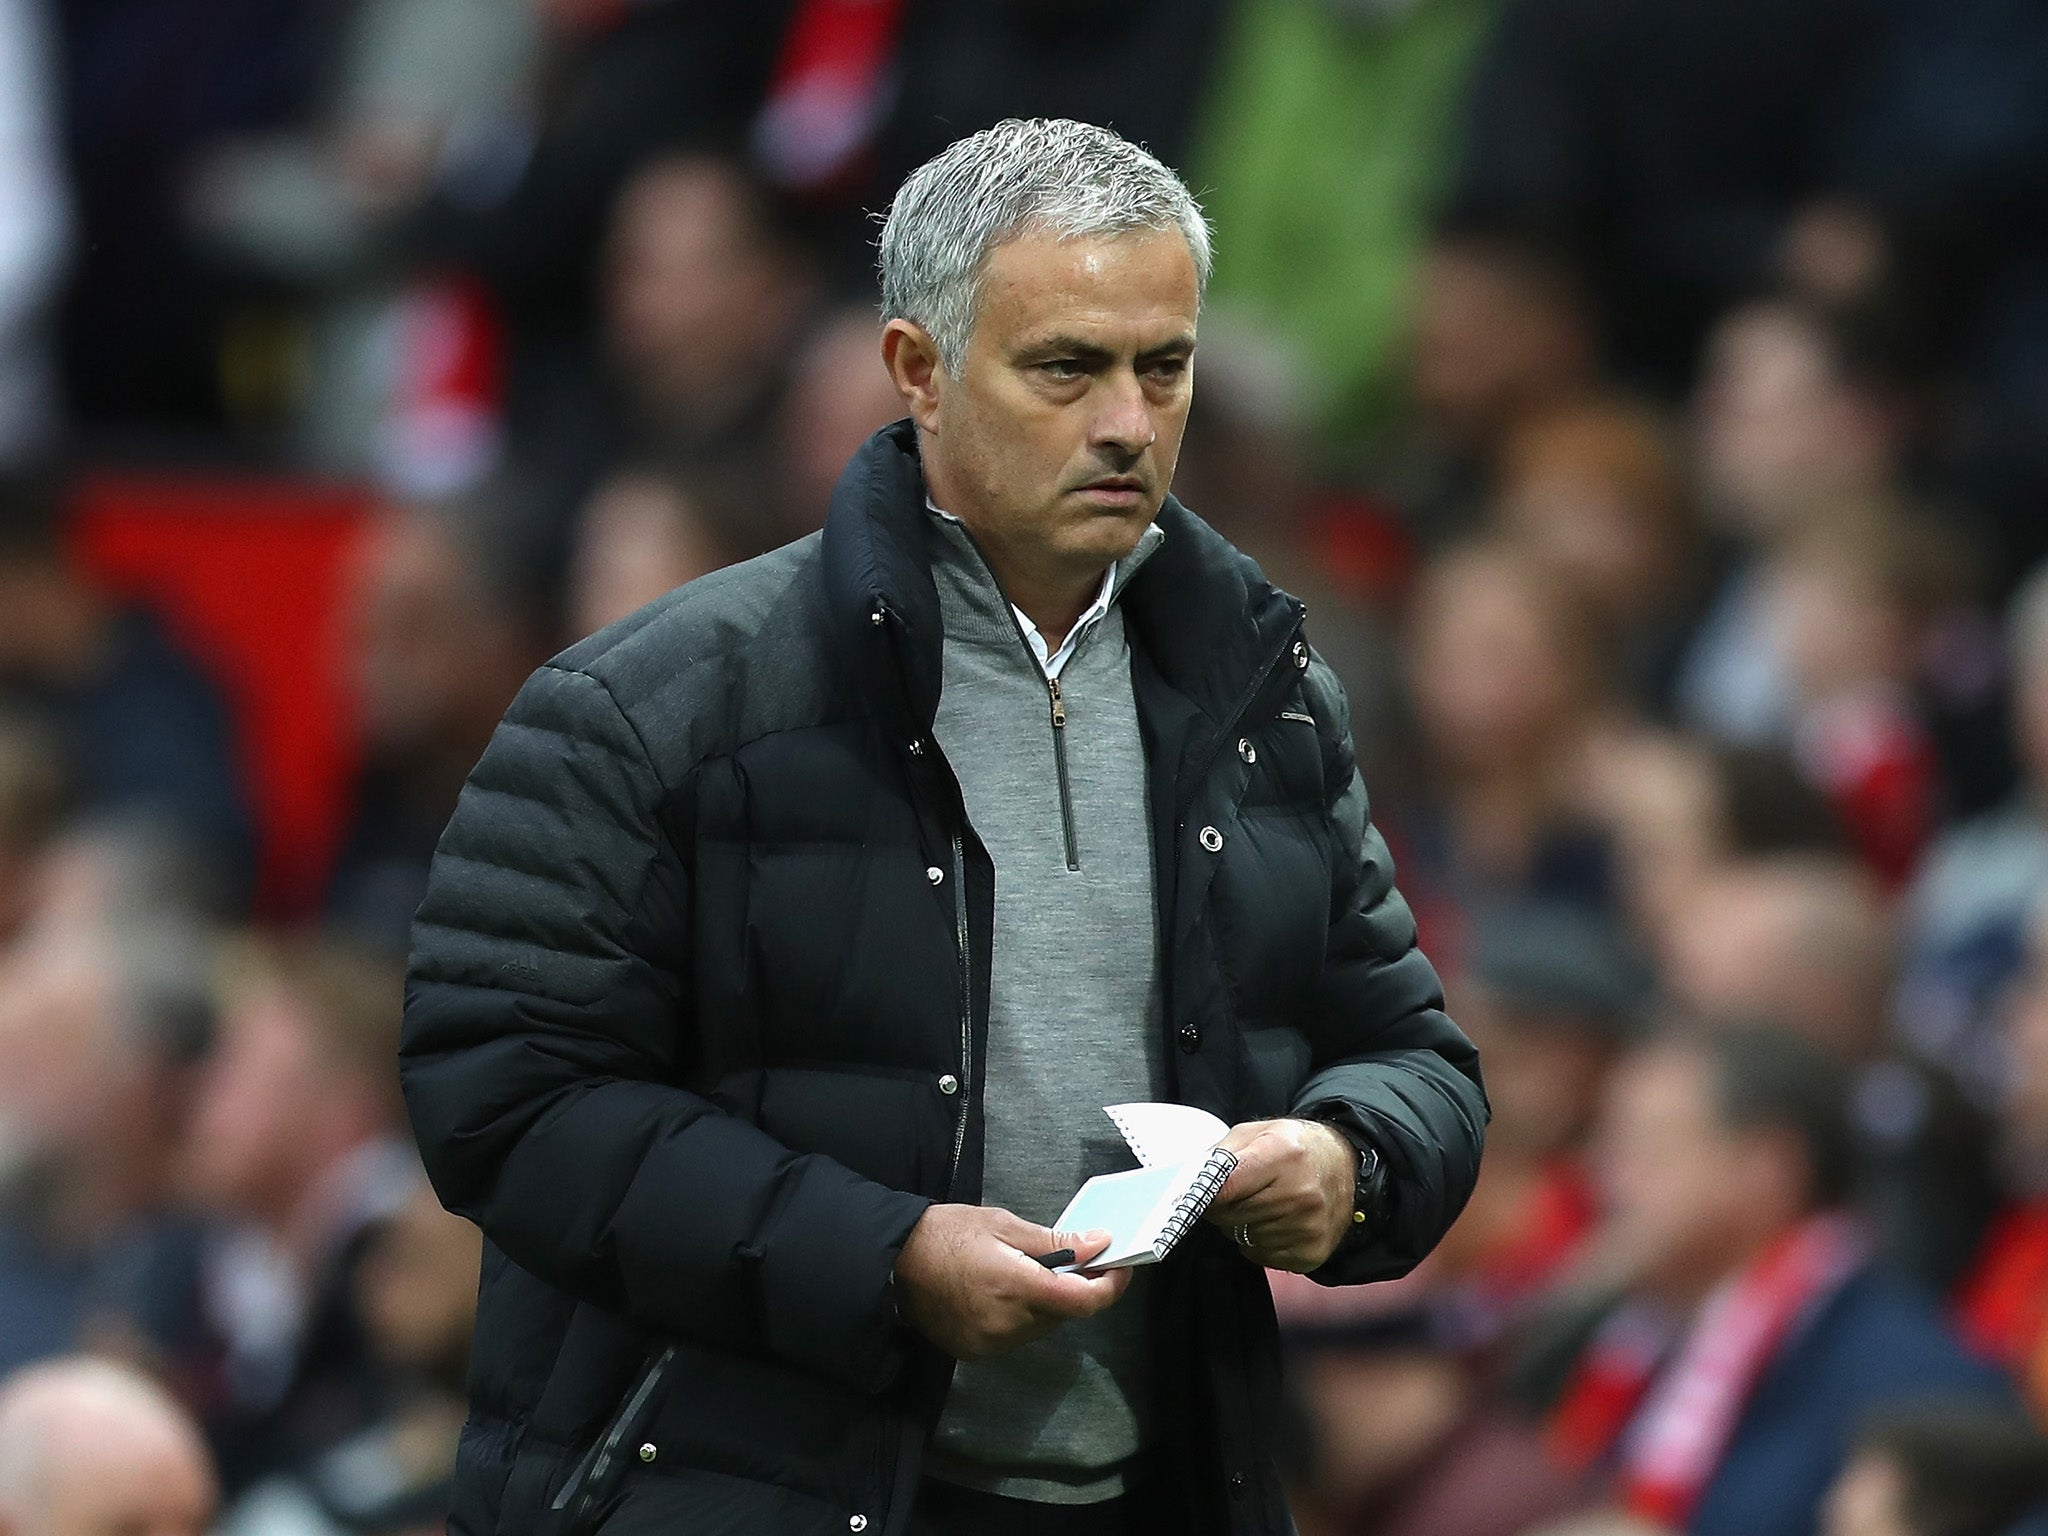 Mourinho is making a habit for publicly criticising his players